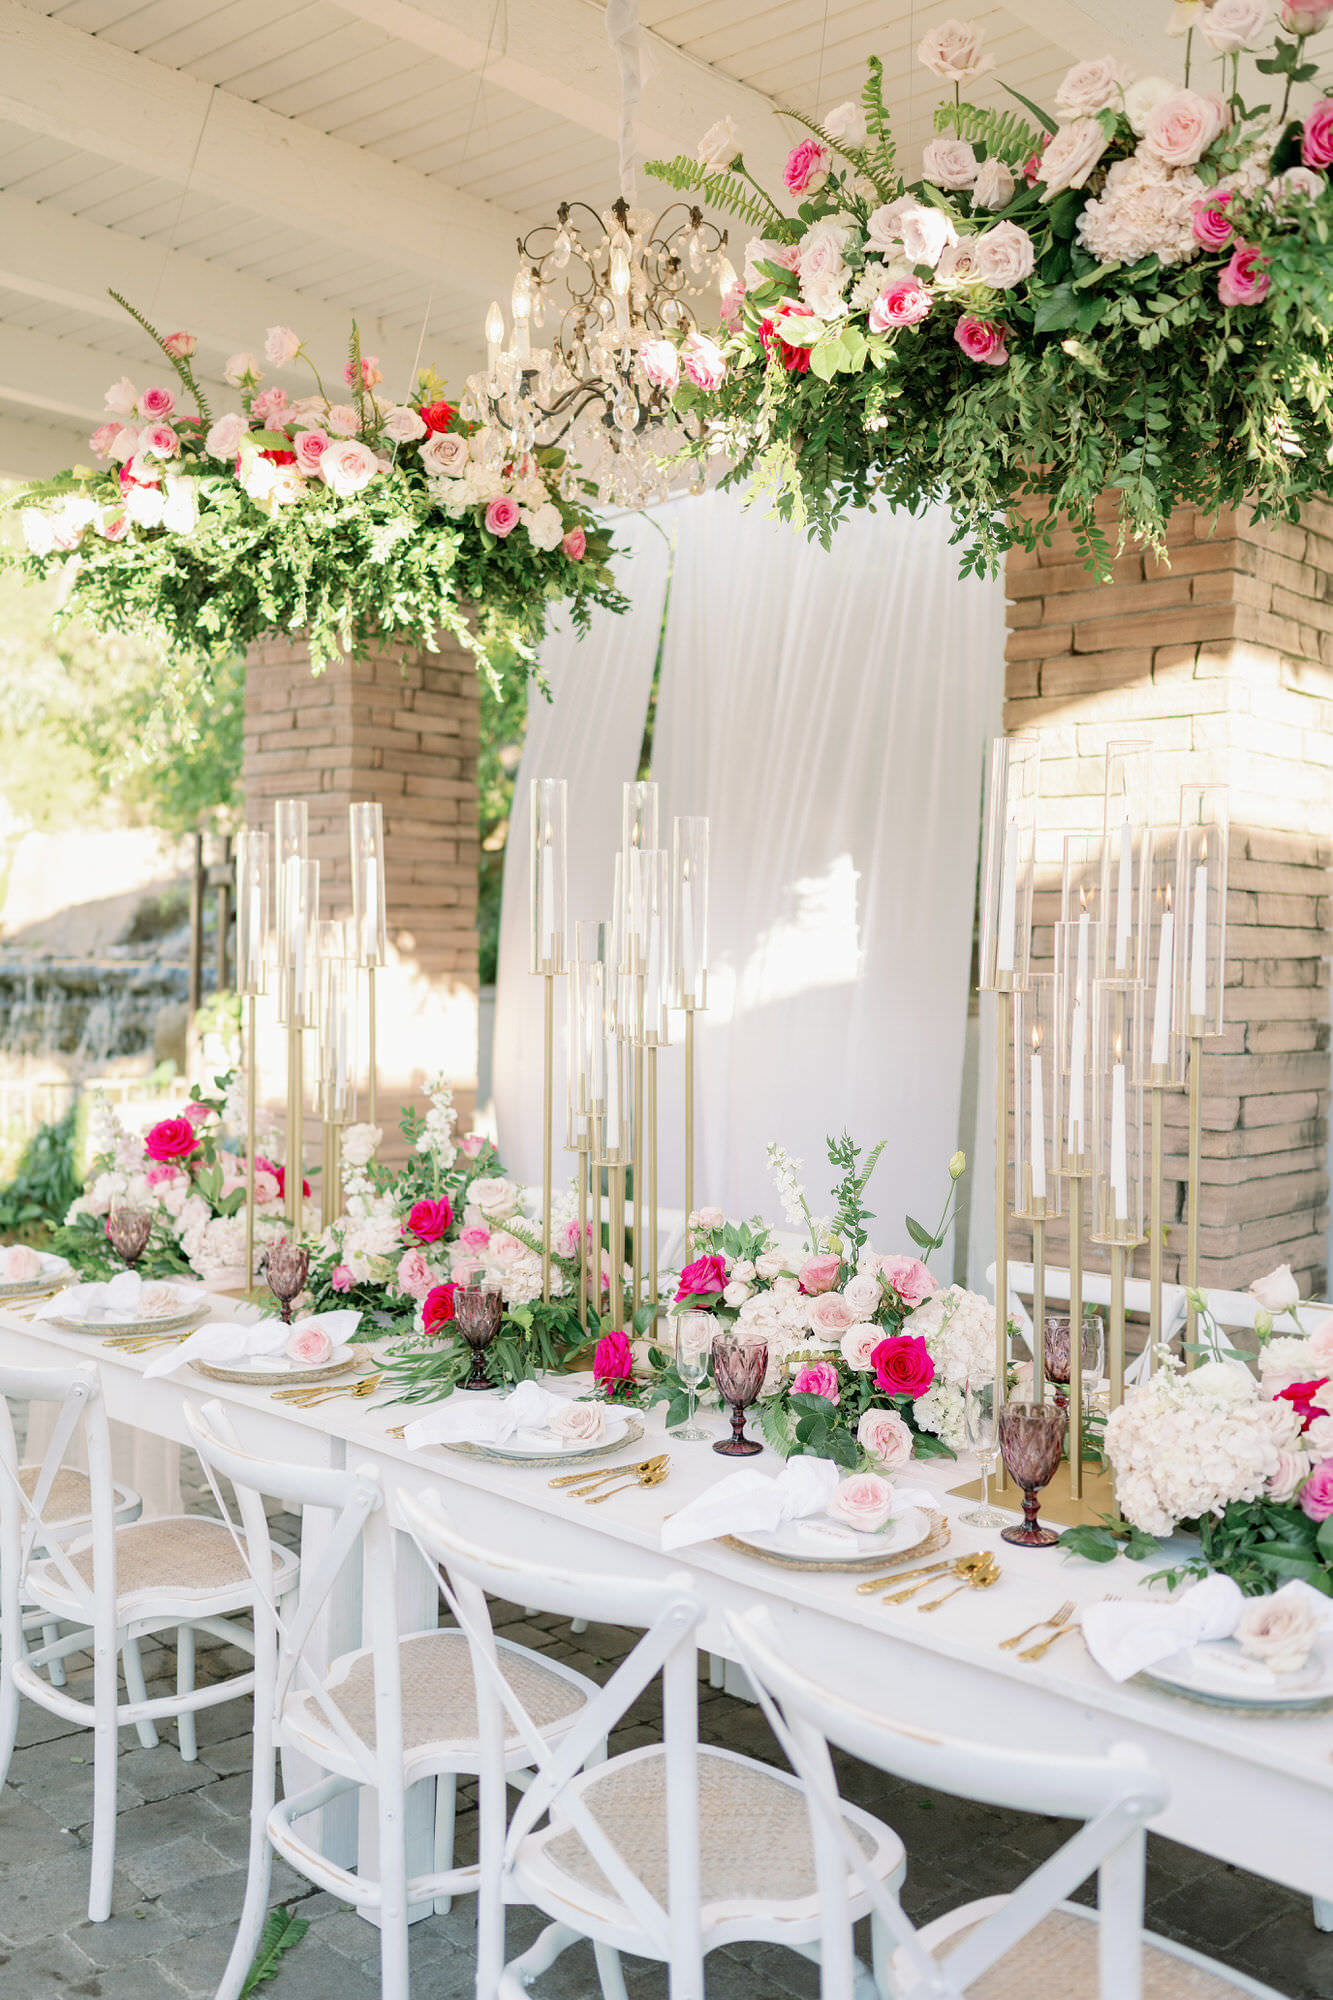 Pink wedding table decorations with hanging installation - Peony Park Photography